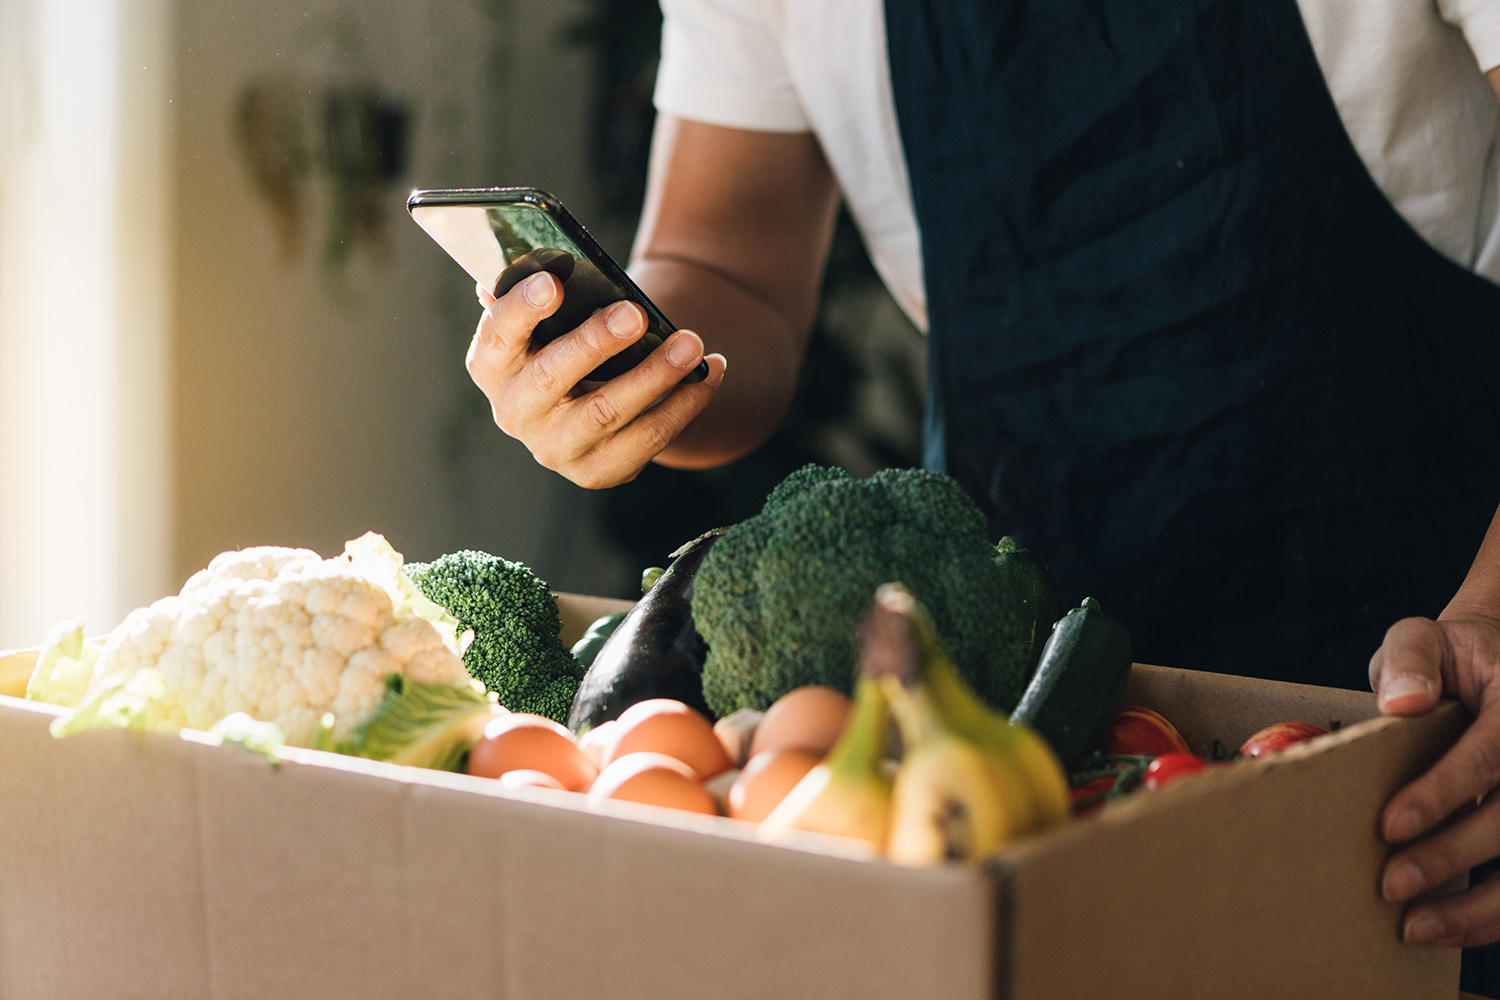 7 Best Places to Order Groceries Online in 2023